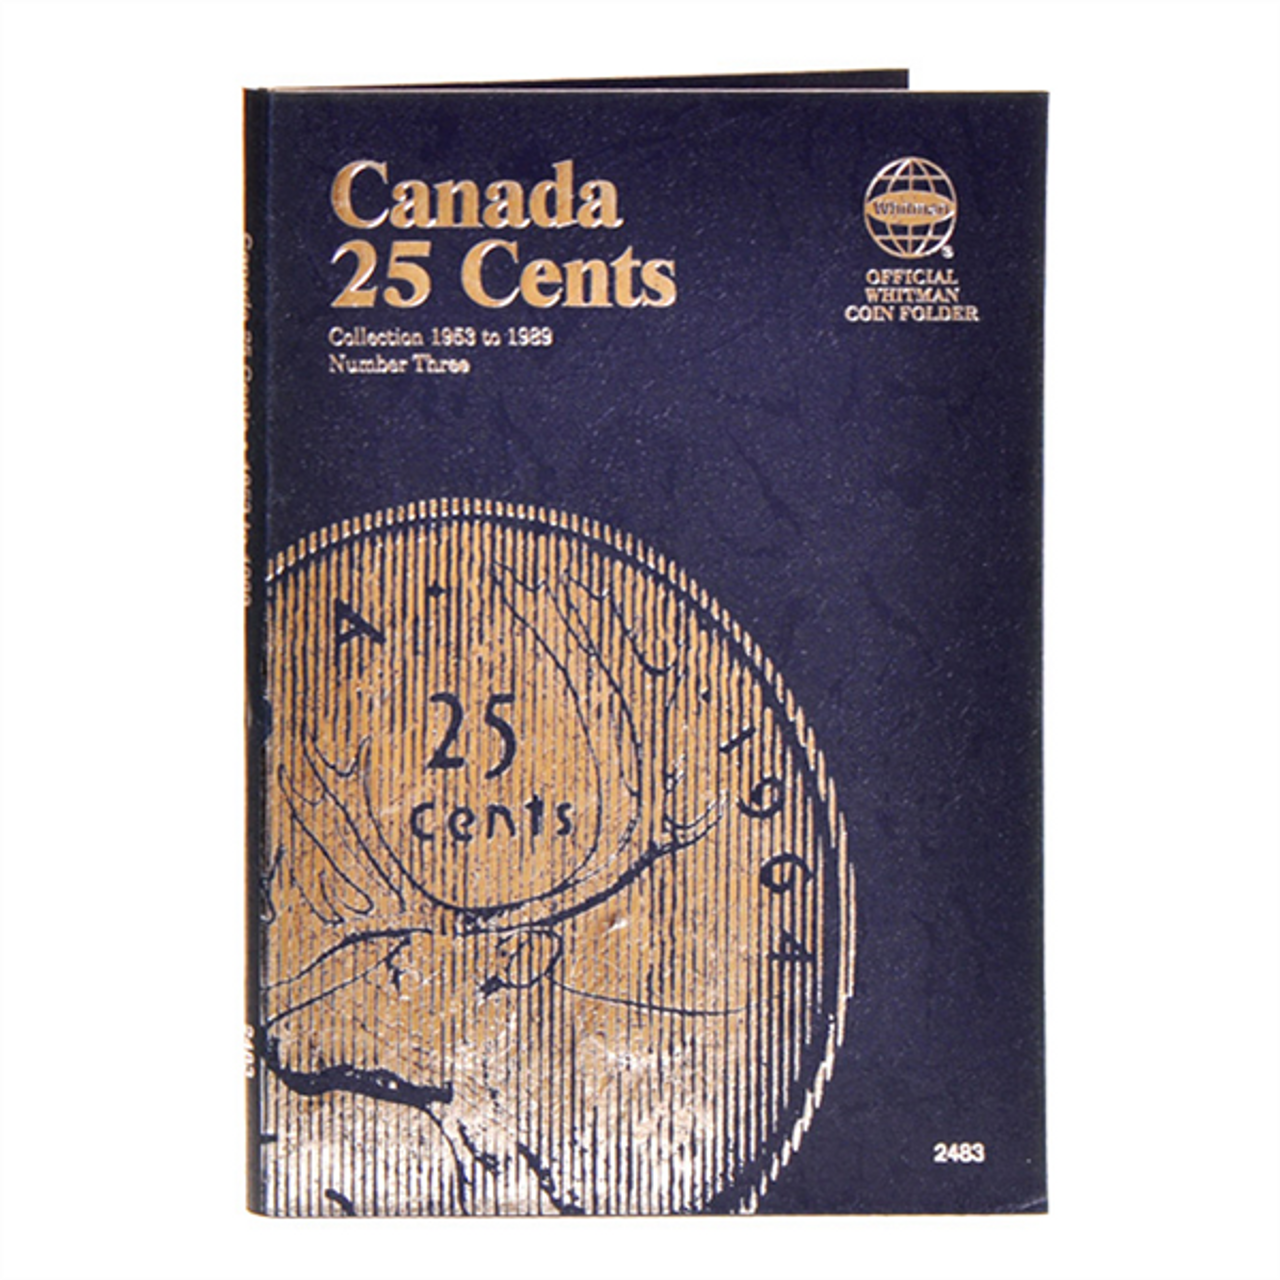 Whitman Coin Folder - Canadian 25 Cents # 3 1953-1989